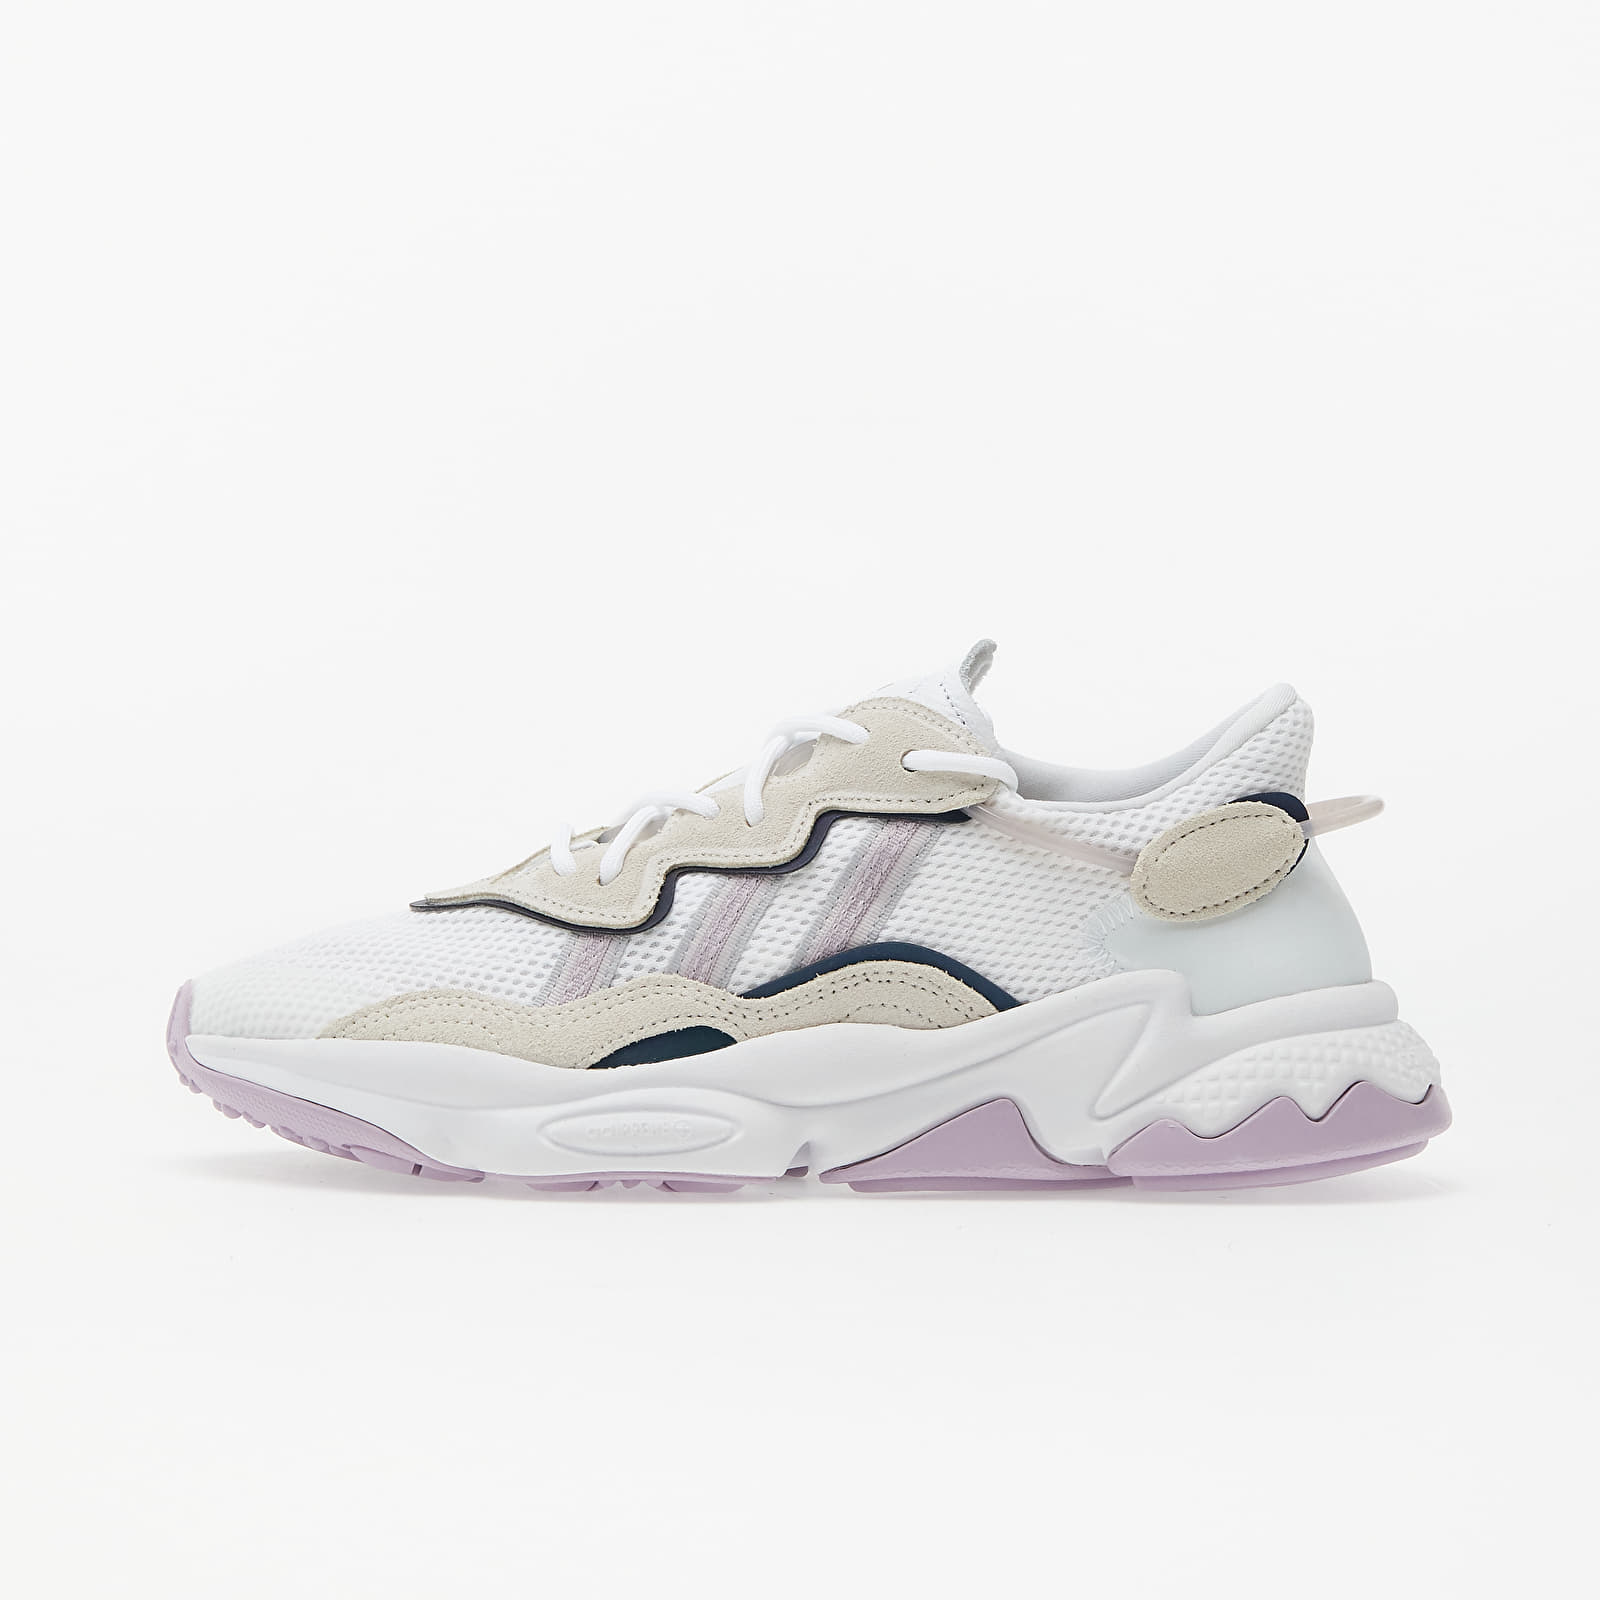 Women's shoes adidas Ozweego W Ftwr White/ Soft Vision/ Off White